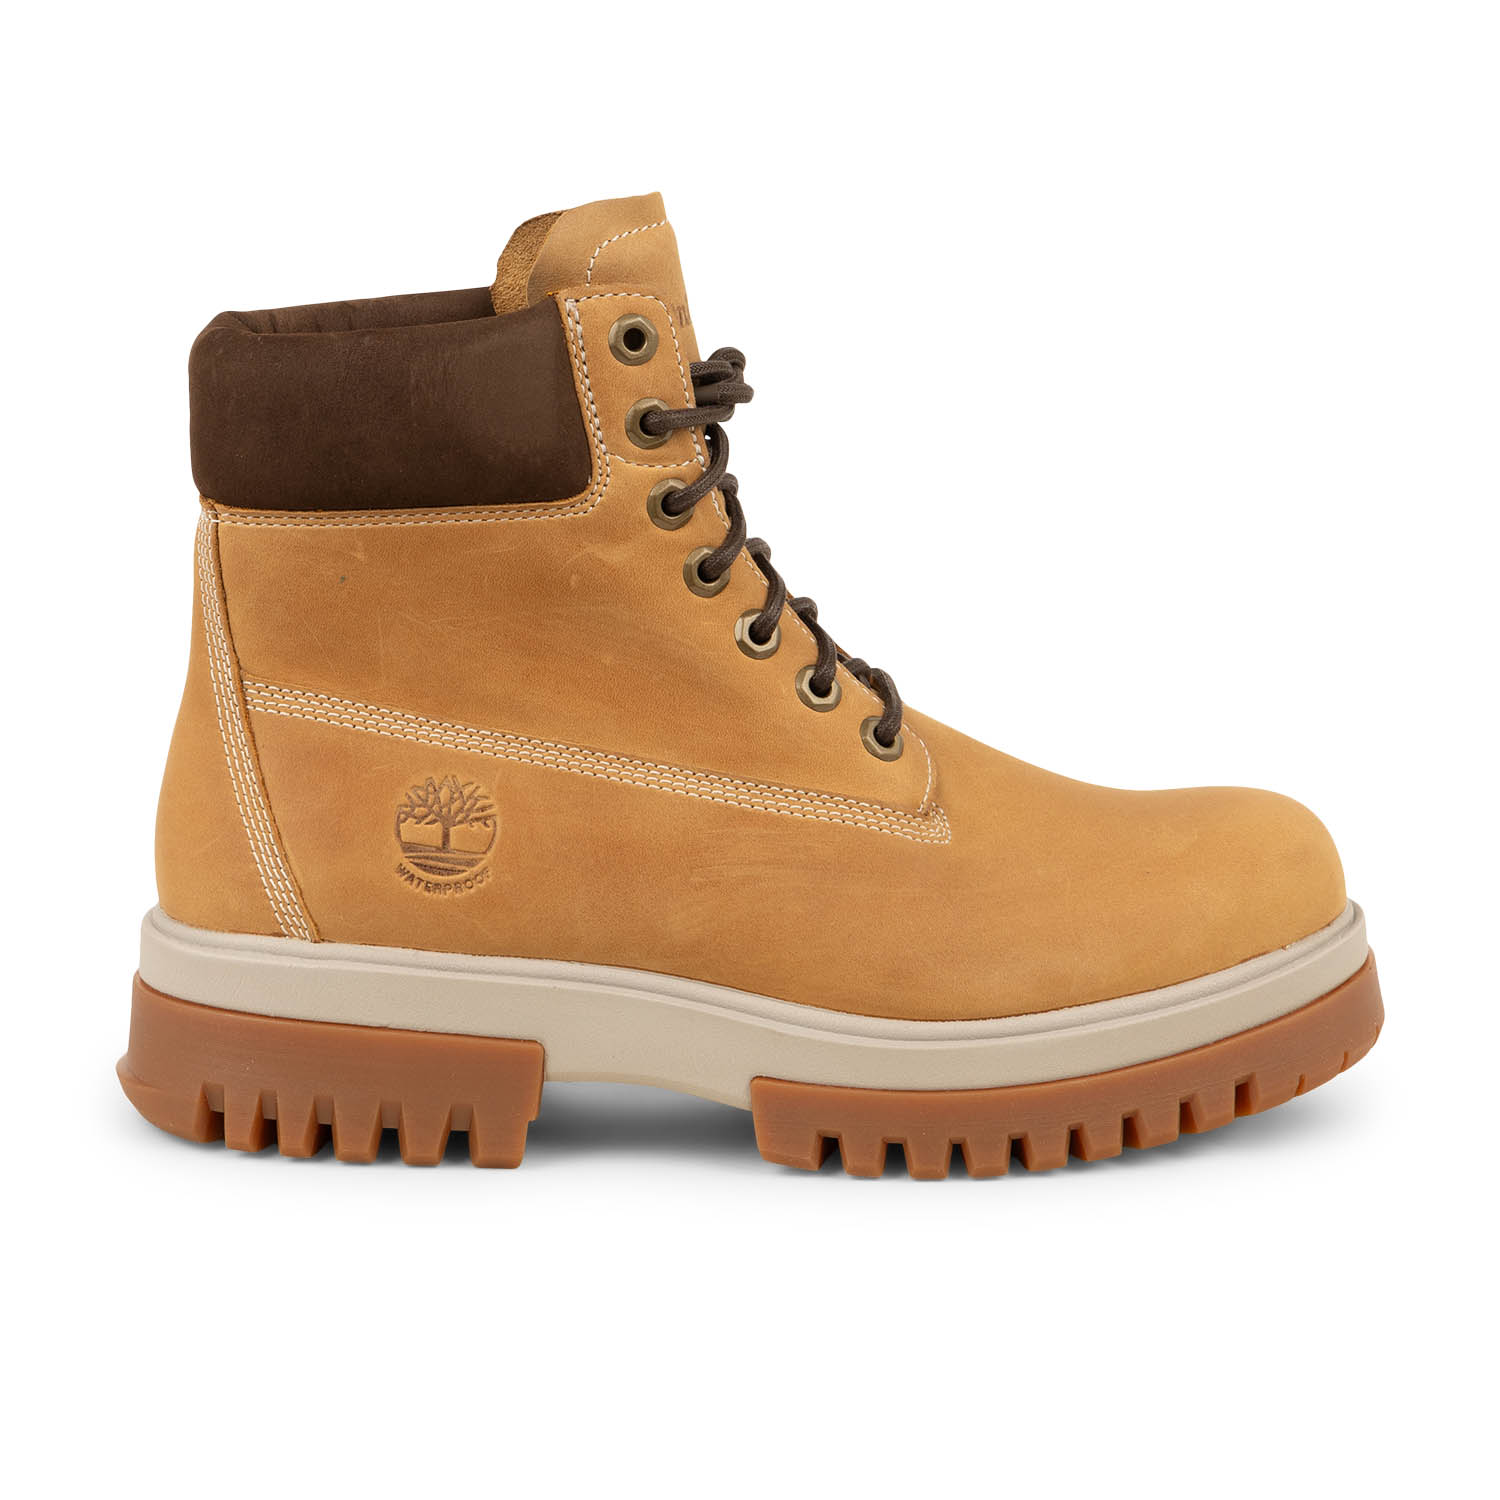 01 - ARBOR ROAD - TIMBERLAND - Boots et bottines - Cuir